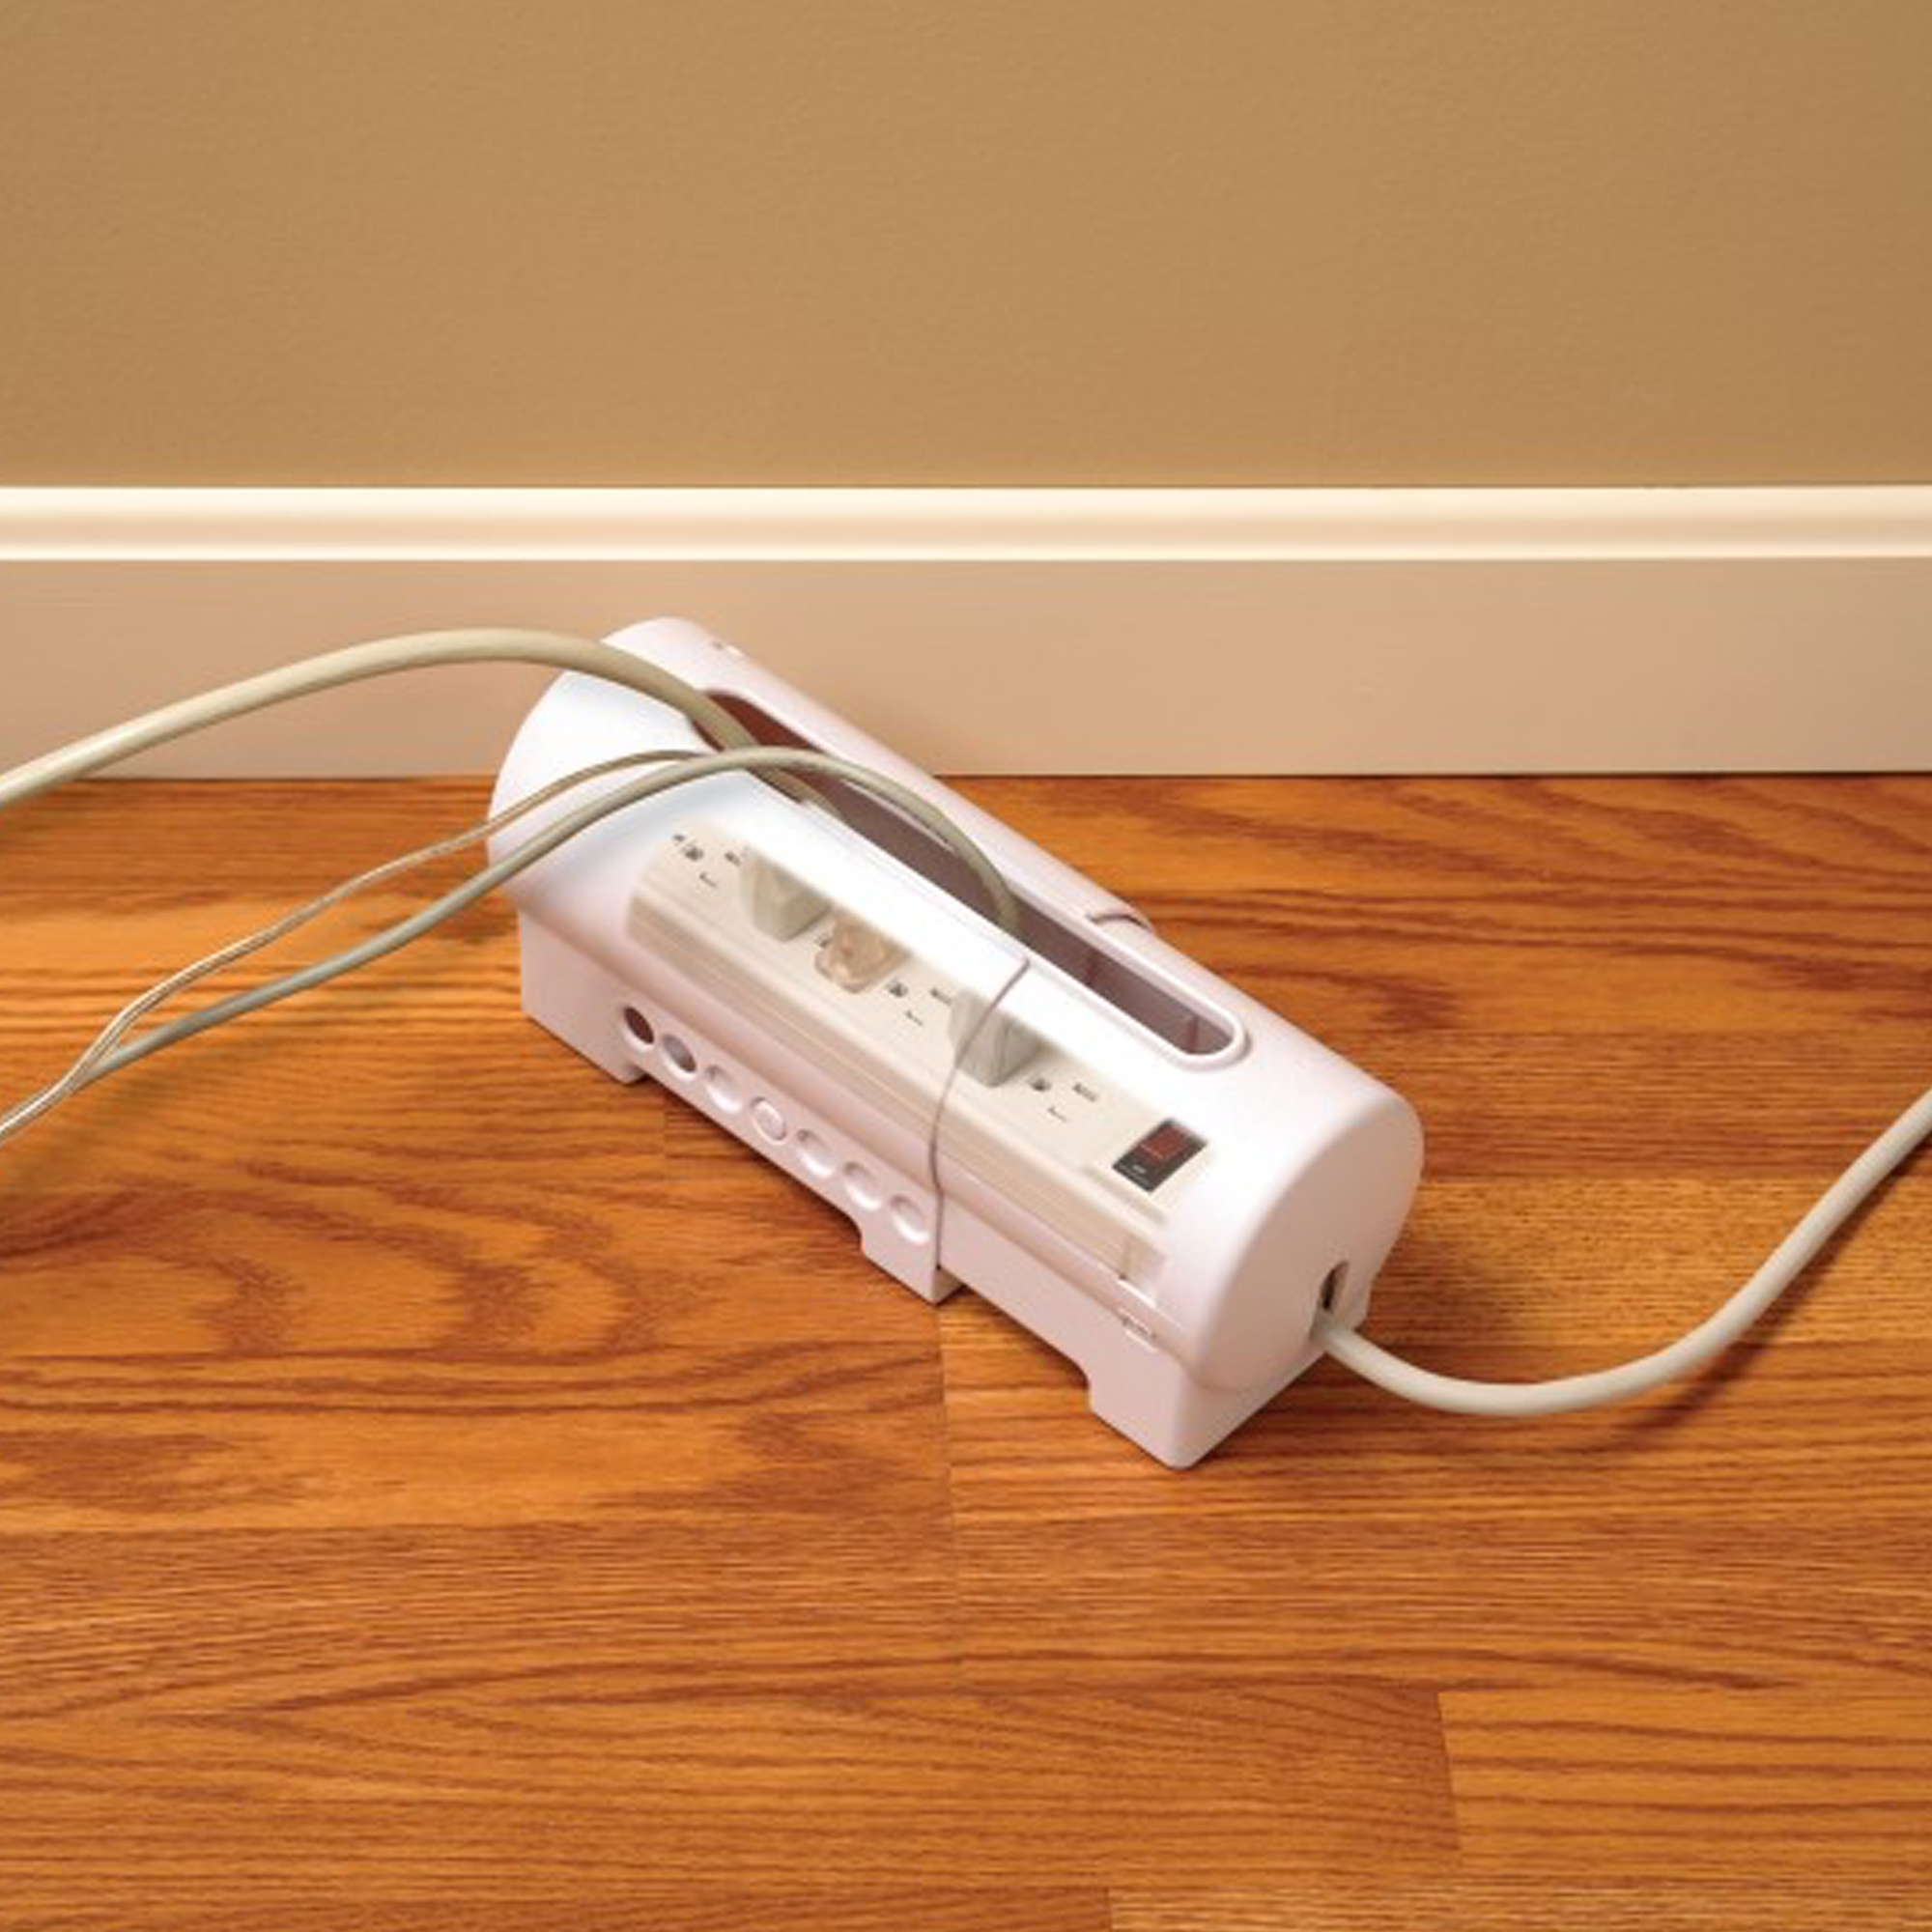 Power Strip Cover - dimensions